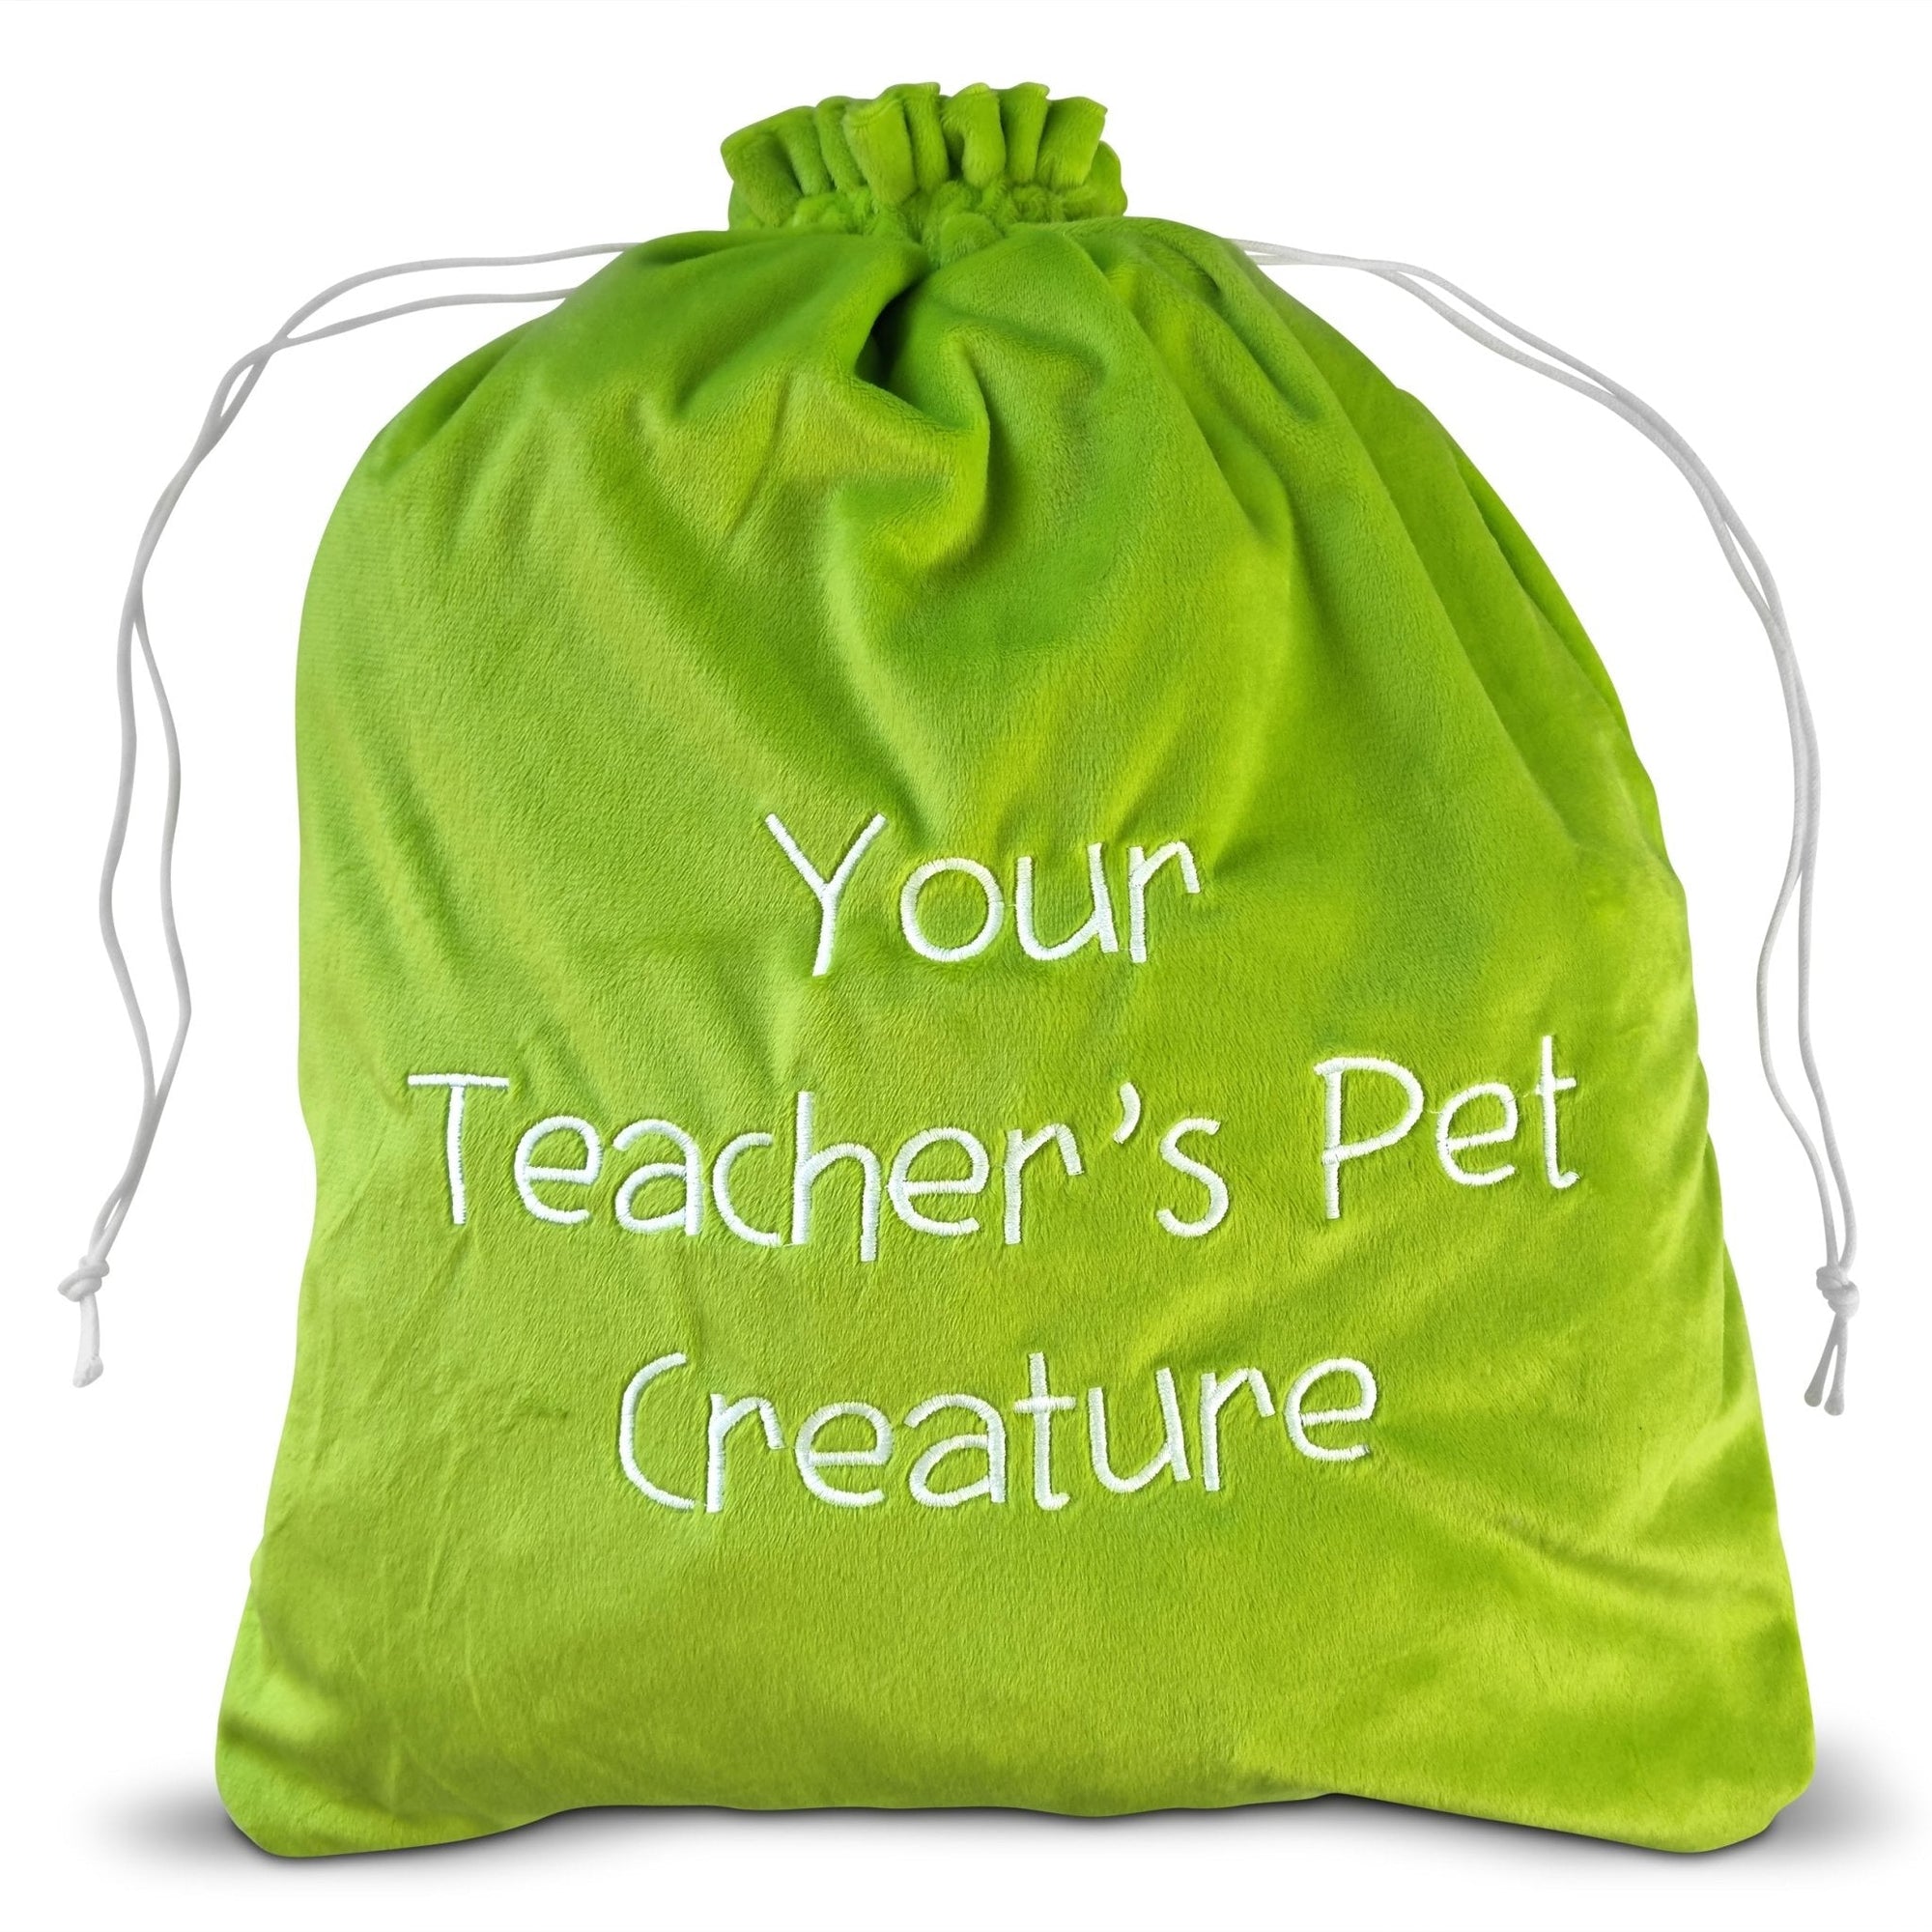 Drawstring Travel and Storage Bag - Green - Your Teacher's Pet Creature